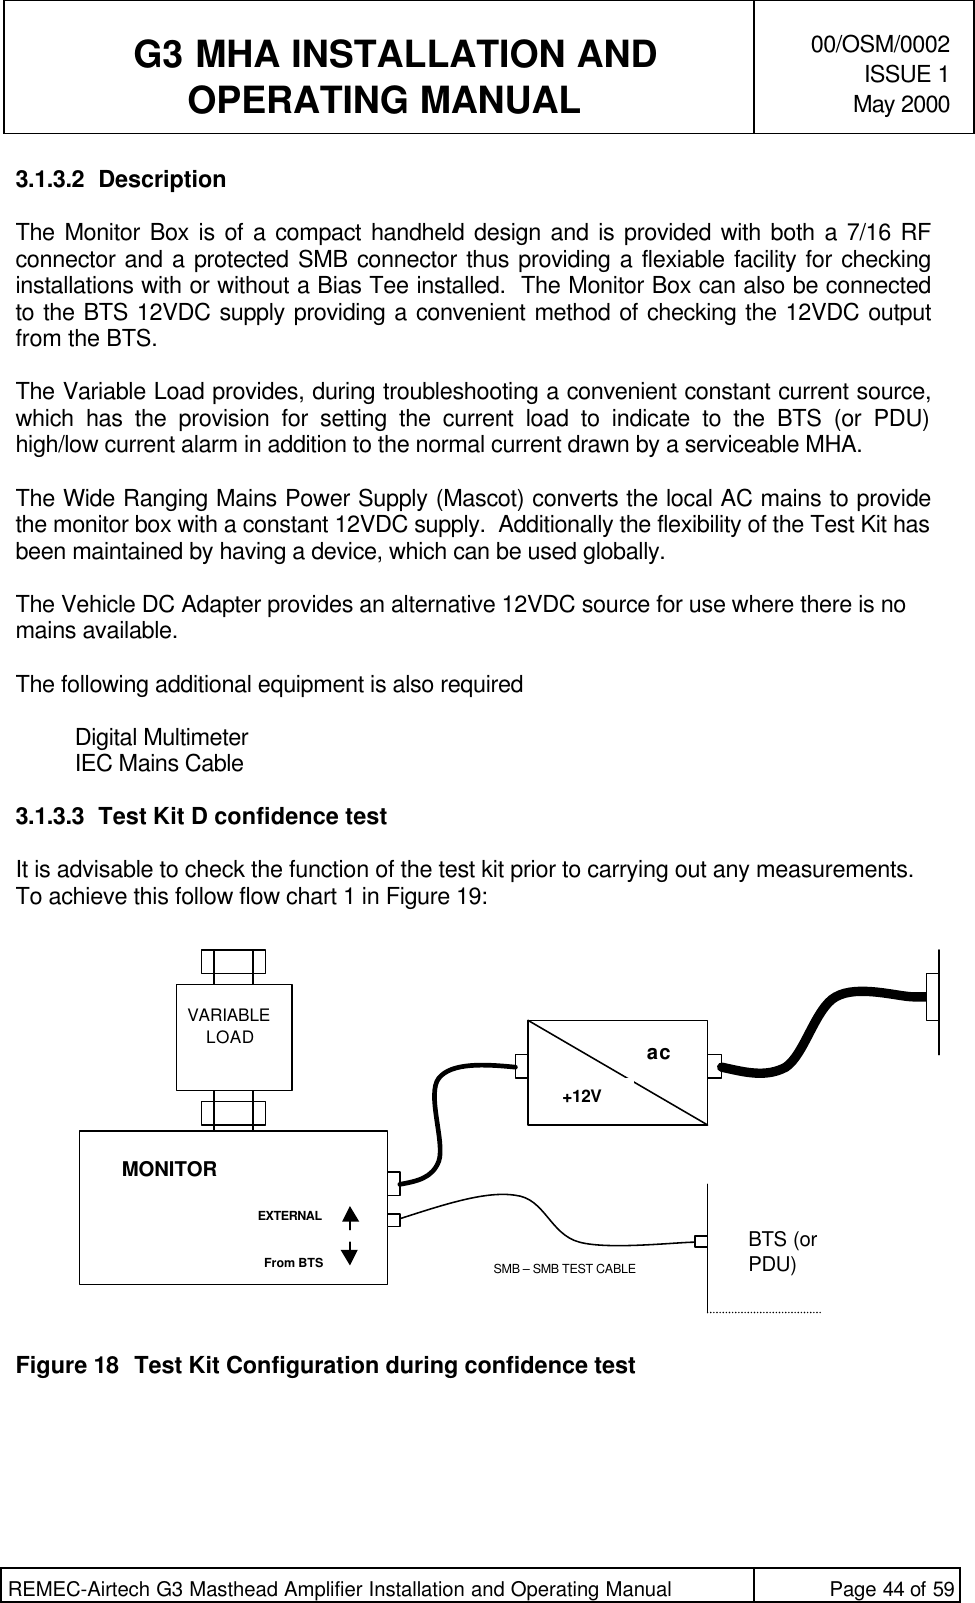   G3 MHA INSTALLATION ANDOPERATING MANUAL00/OSM/0002ISSUE 1May 2000REMEC-Airtech G3 Masthead Amplifier Installation and Operating Manual Page 44 of 593.1.3.2 DescriptionThe Monitor Box is of a compact handheld design and is provided with both a 7/16 RFconnector and a protected SMB connector thus providing a flexiable facility for checkinginstallations with or without a Bias Tee installed.  The Monitor Box can also be connectedto the BTS 12VDC supply providing a convenient method of checking the 12VDC outputfrom the BTS.The Variable Load provides, during troubleshooting a convenient constant current source,which has the provision for setting the current load to indicate to the BTS (or PDU)high/low current alarm in addition to the normal current drawn by a serviceable MHA.The Wide Ranging Mains Power Supply (Mascot) converts the local AC mains to providethe monitor box with a constant 12VDC supply.  Additionally the flexibility of the Test Kit hasbeen maintained by having a device, which can be used globally.The Vehicle DC Adapter provides an alternative 12VDC source for use where there is nomains available.The following additional equipment is also requiredDigital MultimeterIEC Mains Cable3.1.3.3 Test Kit D confidence testIt is advisable to check the function of the test kit prior to carrying out any measurements.To achieve this follow flow chart 1 in Figure 19:Figure 18 Test Kit Configuration during confidence testMONITOREXTERNALFrom BTSac +12VBTS (orPDU)SMB – SMB TEST CABLEVARIABLELOAD